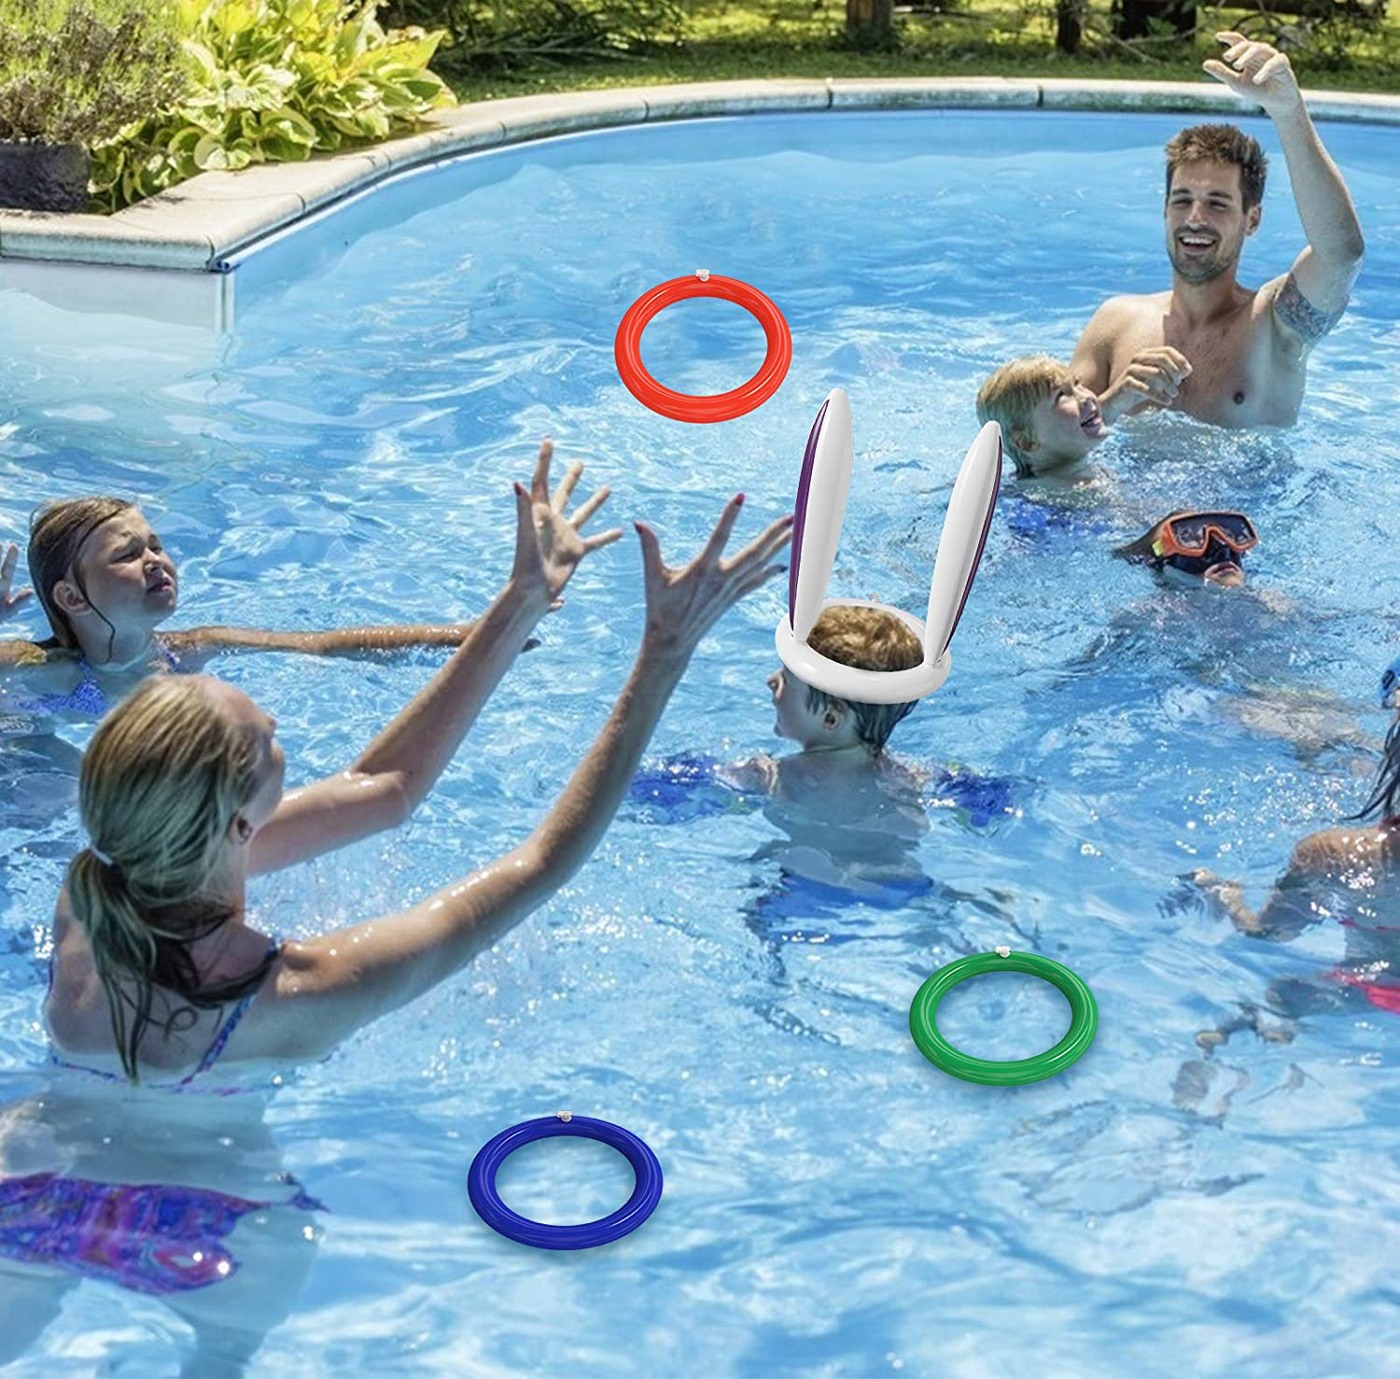 Inflatable Ring Toss Game Set, Ring Toss Pool Toys with 4 Pcs Floating Rings and a Inflatable Rabbit Ears, Outdoor and Pool Toys for Kids Adults, Multiplayer Games for Pool Beach Party